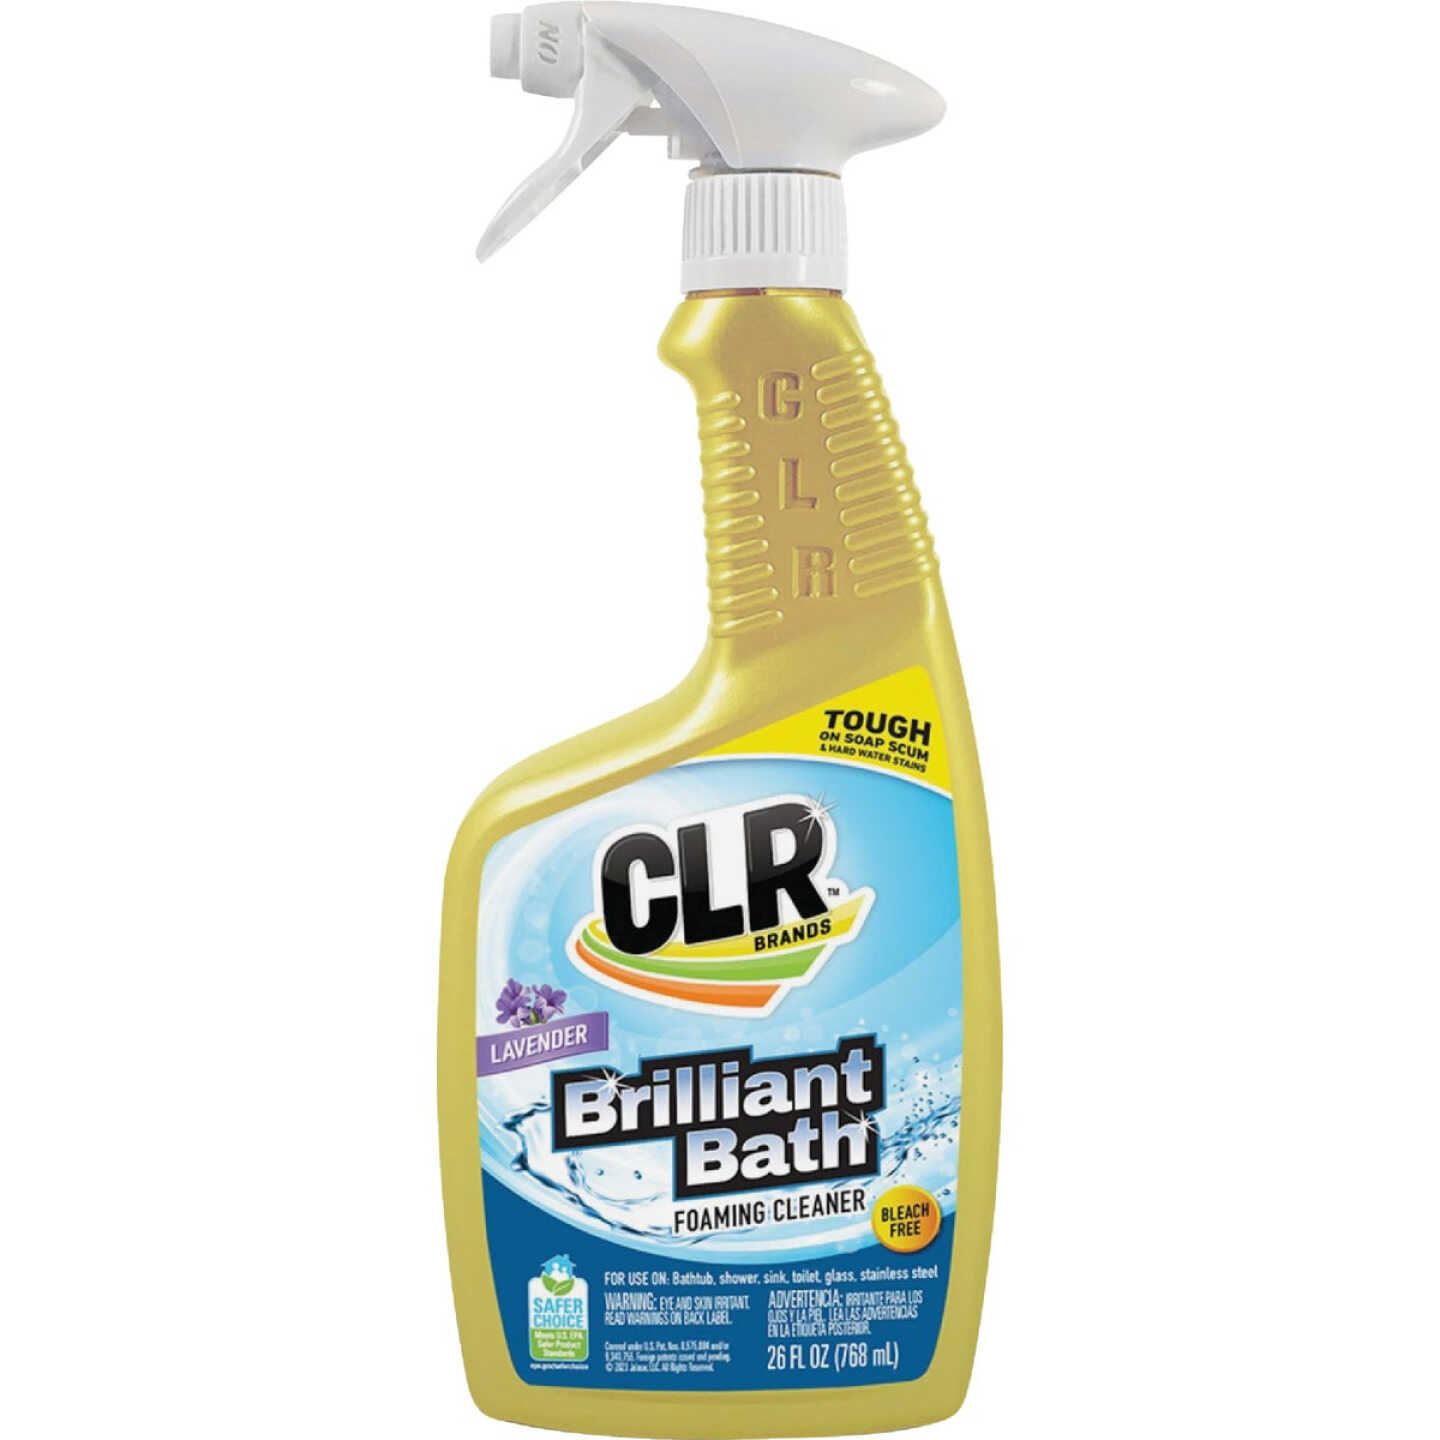 CLR Brilliant Bath Foaming Bathroom Cleaner Spray - For Use On Toilet,  Bath, Shower, Sink, Glass, Stainless Steel - Fresh Scent, 26 Ounce Bottle  (Pack